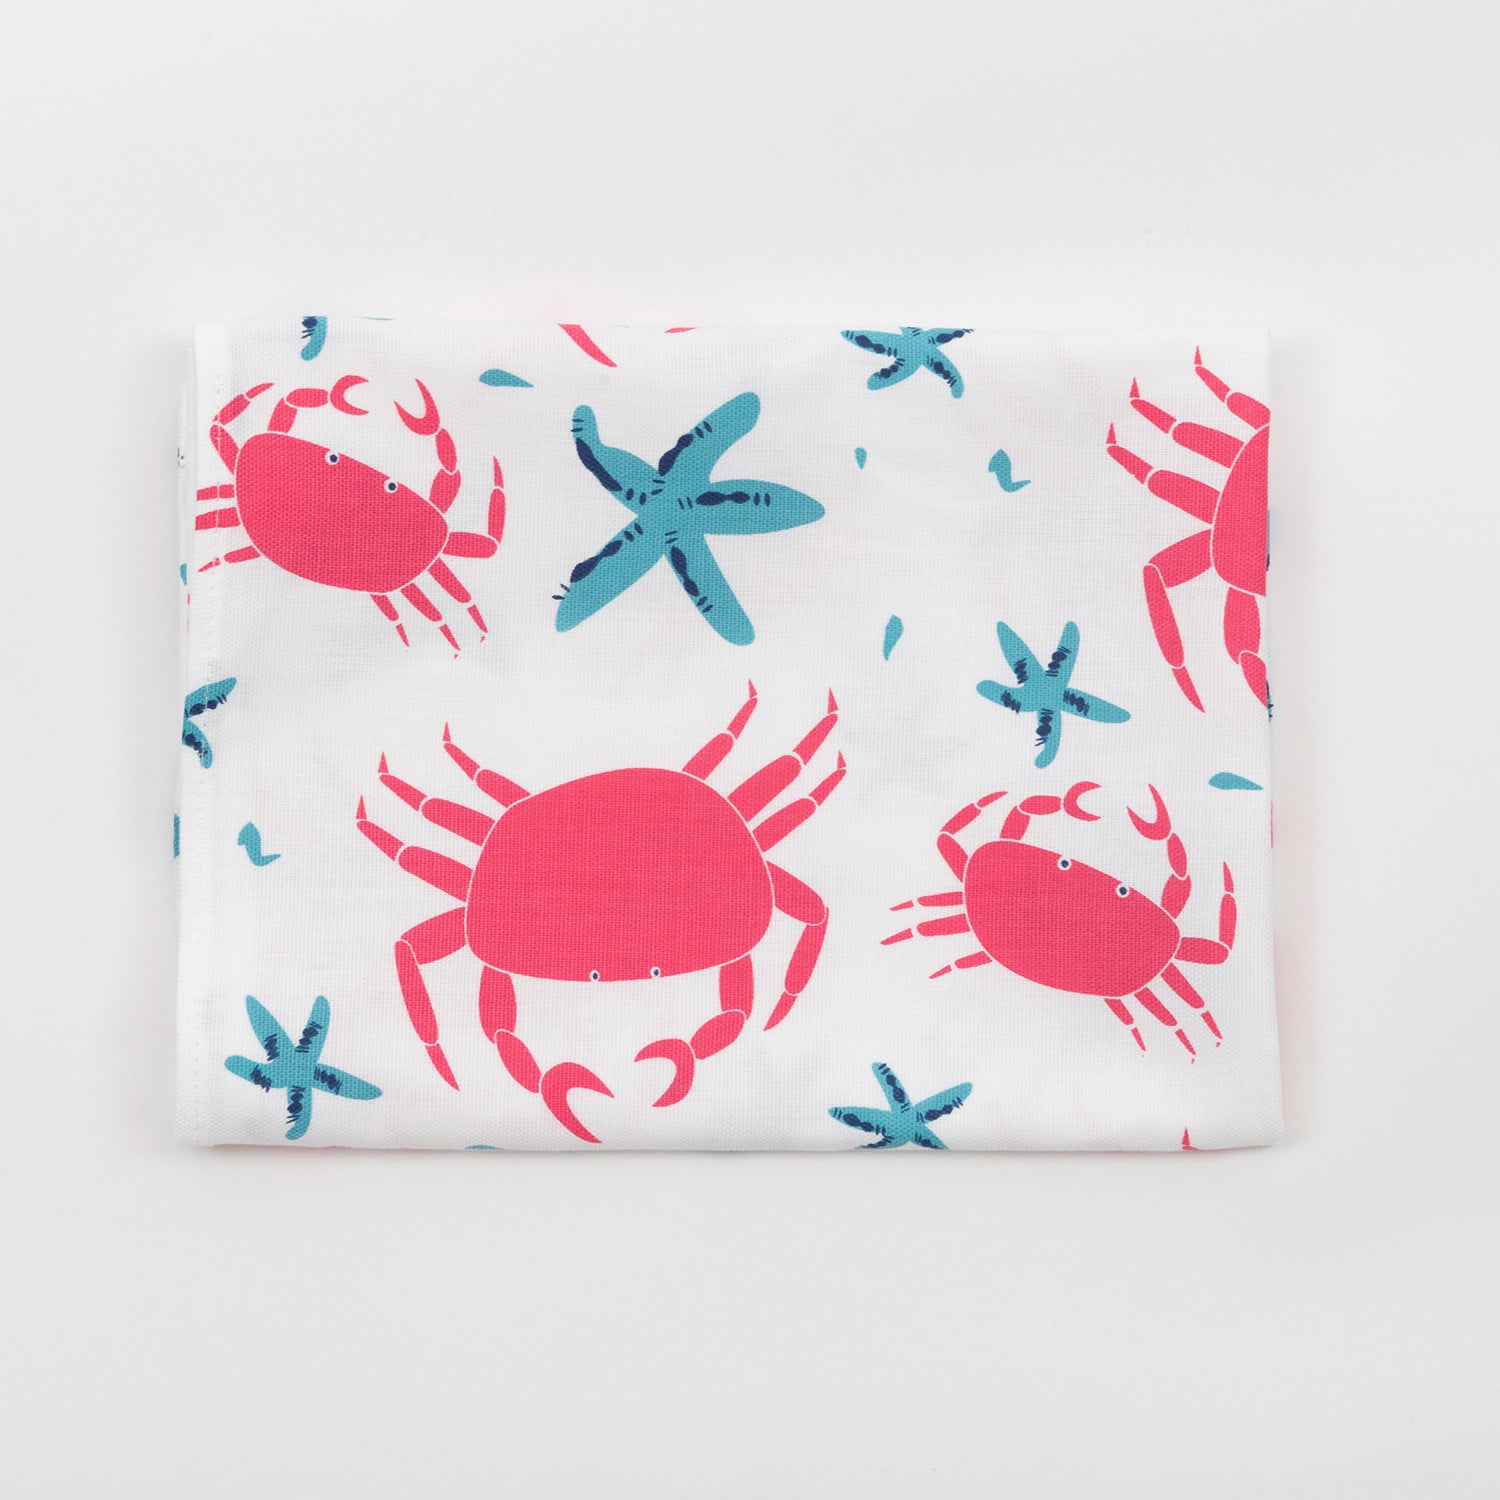 The crab and starfish tea towel features pink crabs and blue starfish on a light cream background and is folded against a white background.